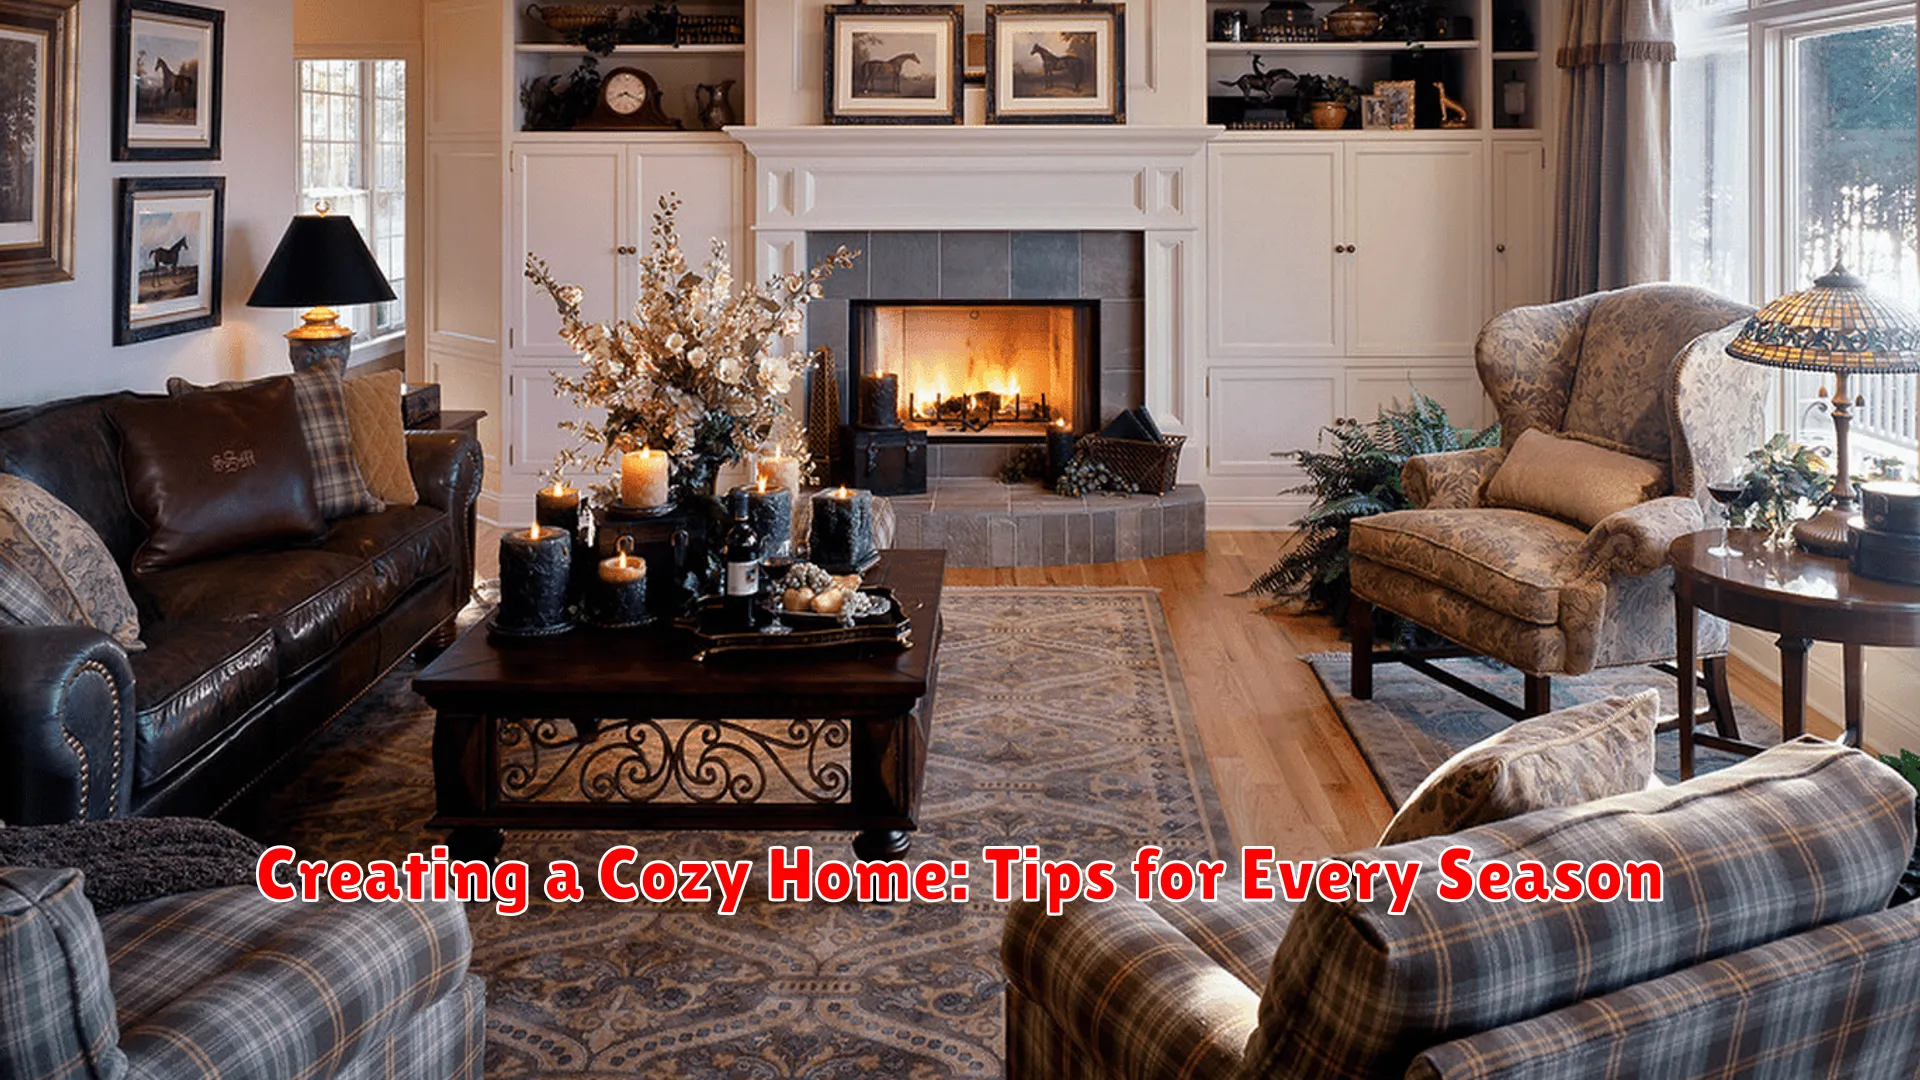 Creating a Cozy Home: Tips for Every Season